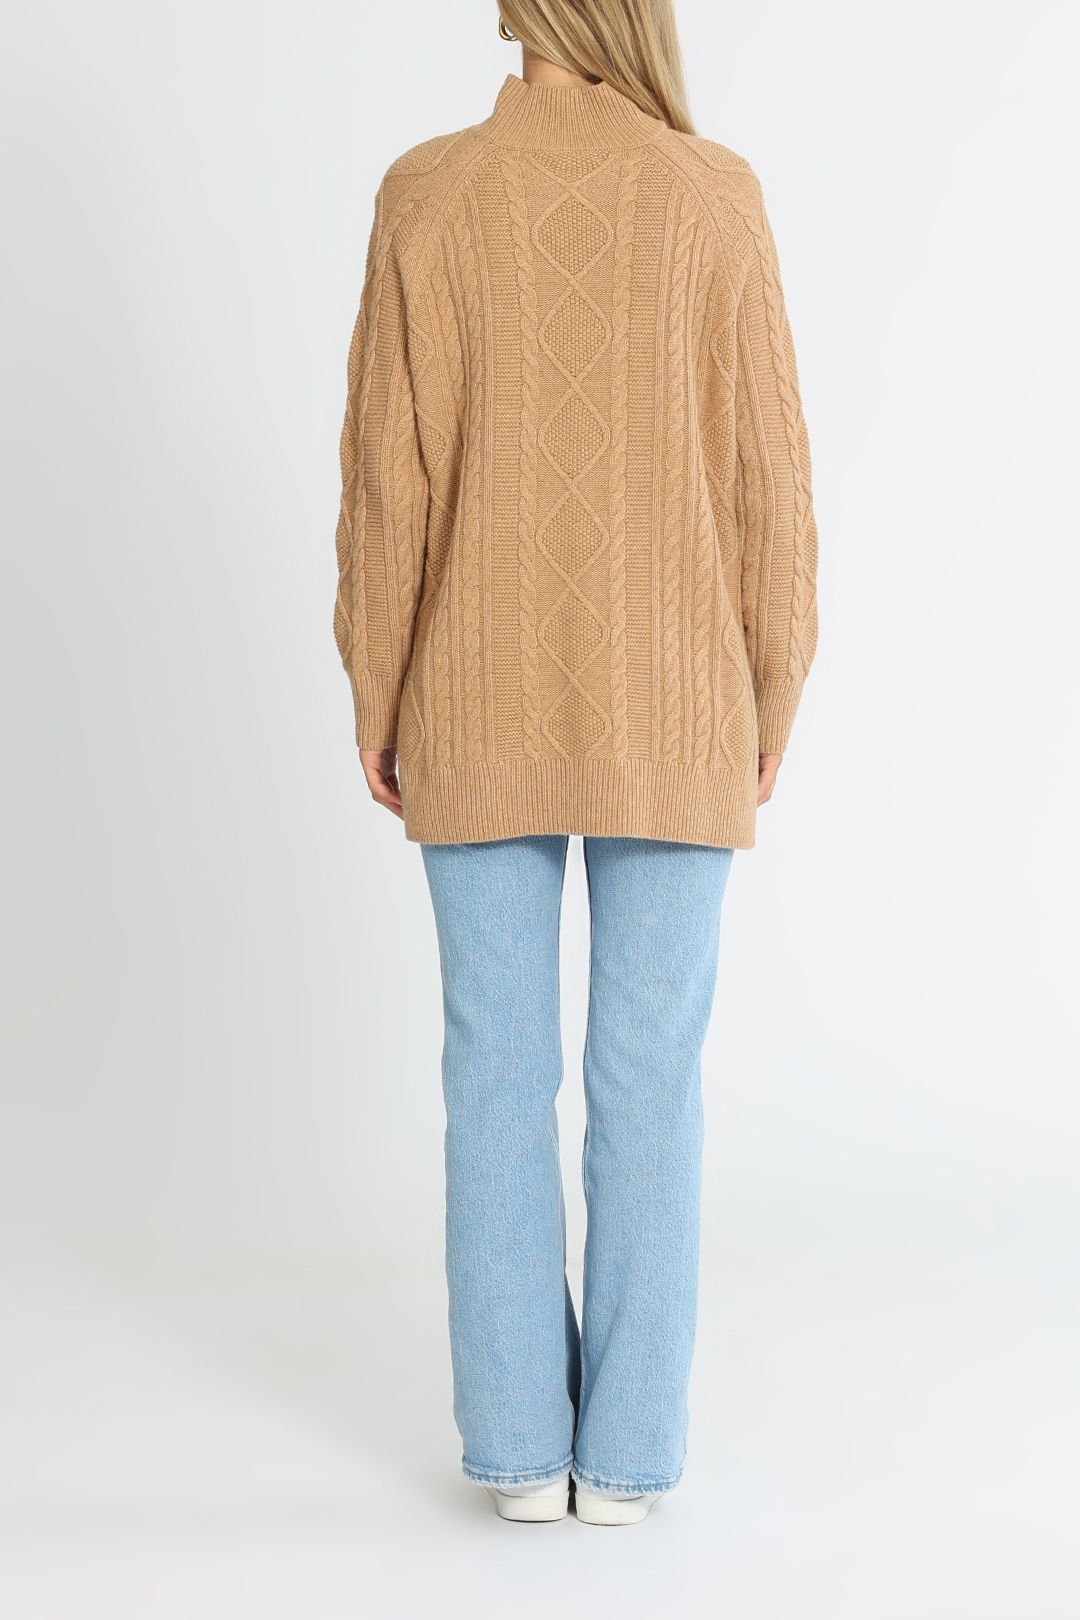 Reiss Nina Cable Tunic Long Sleeves